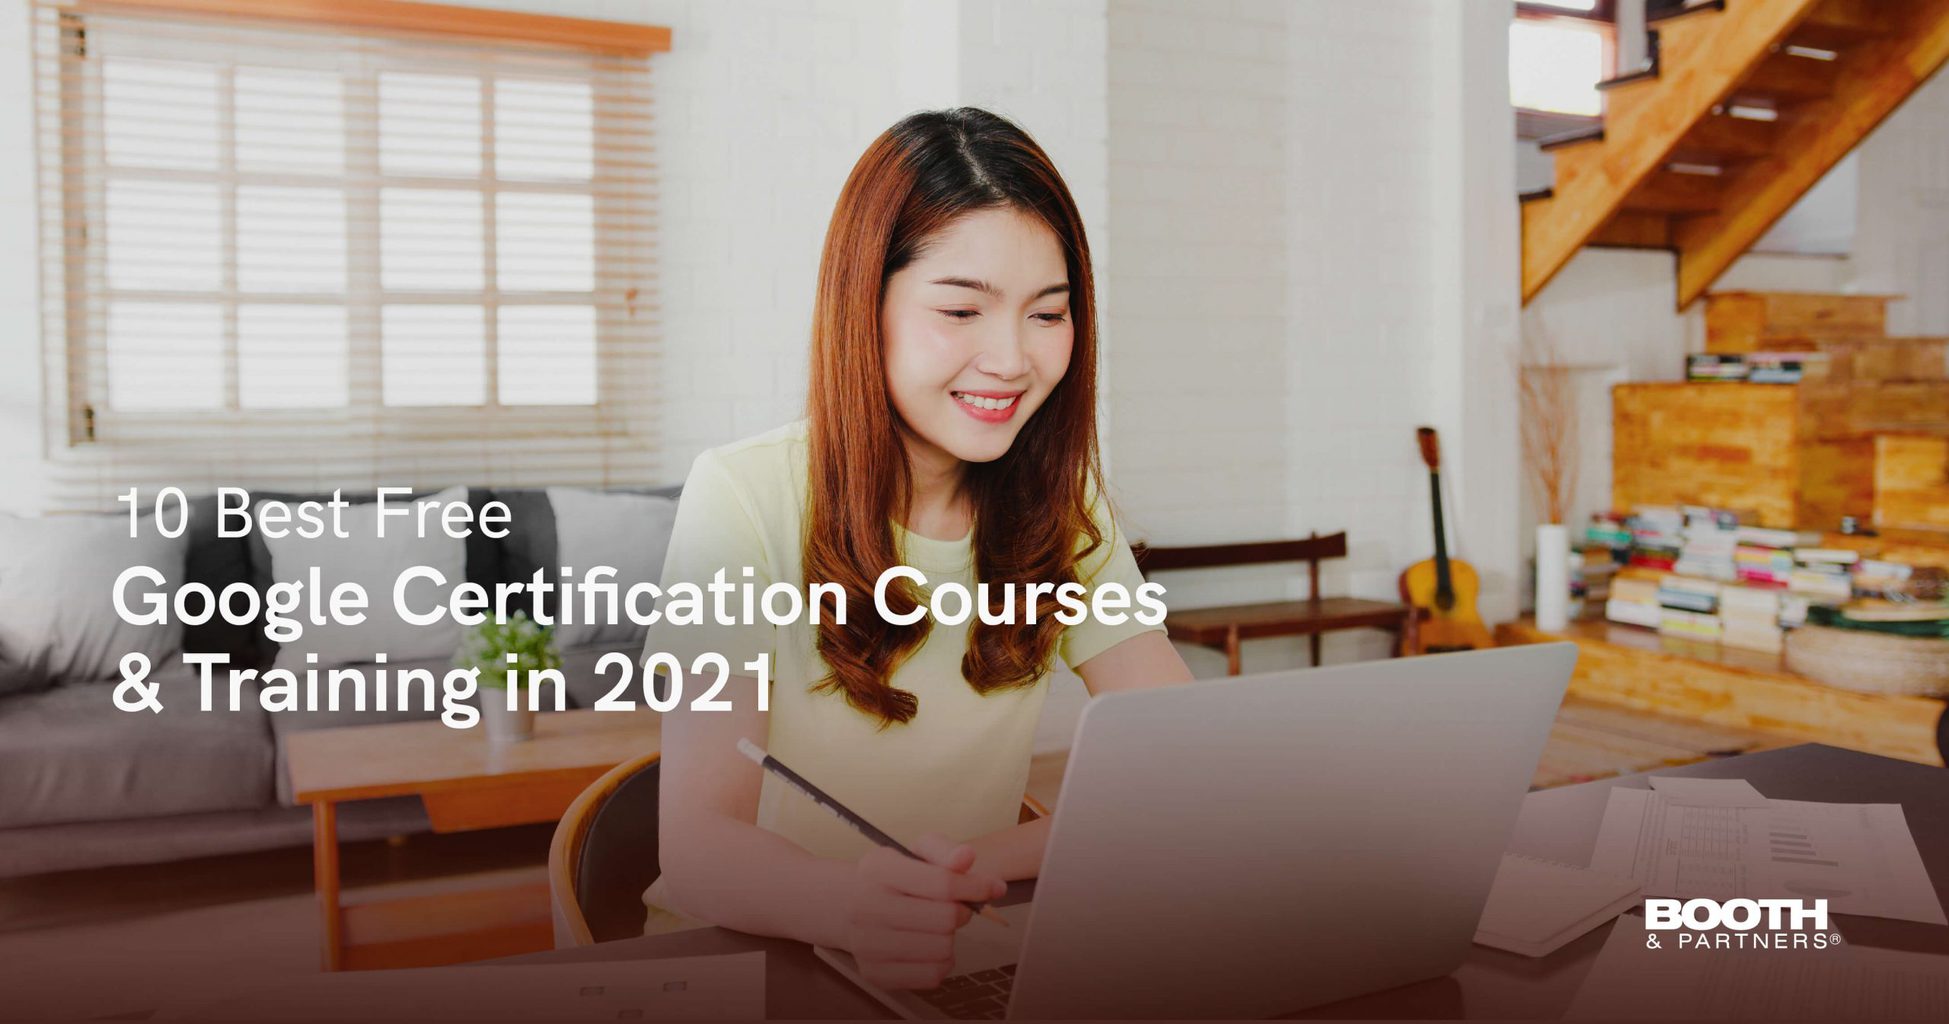 10 Best Free Google Certification Courses & Training in 2021